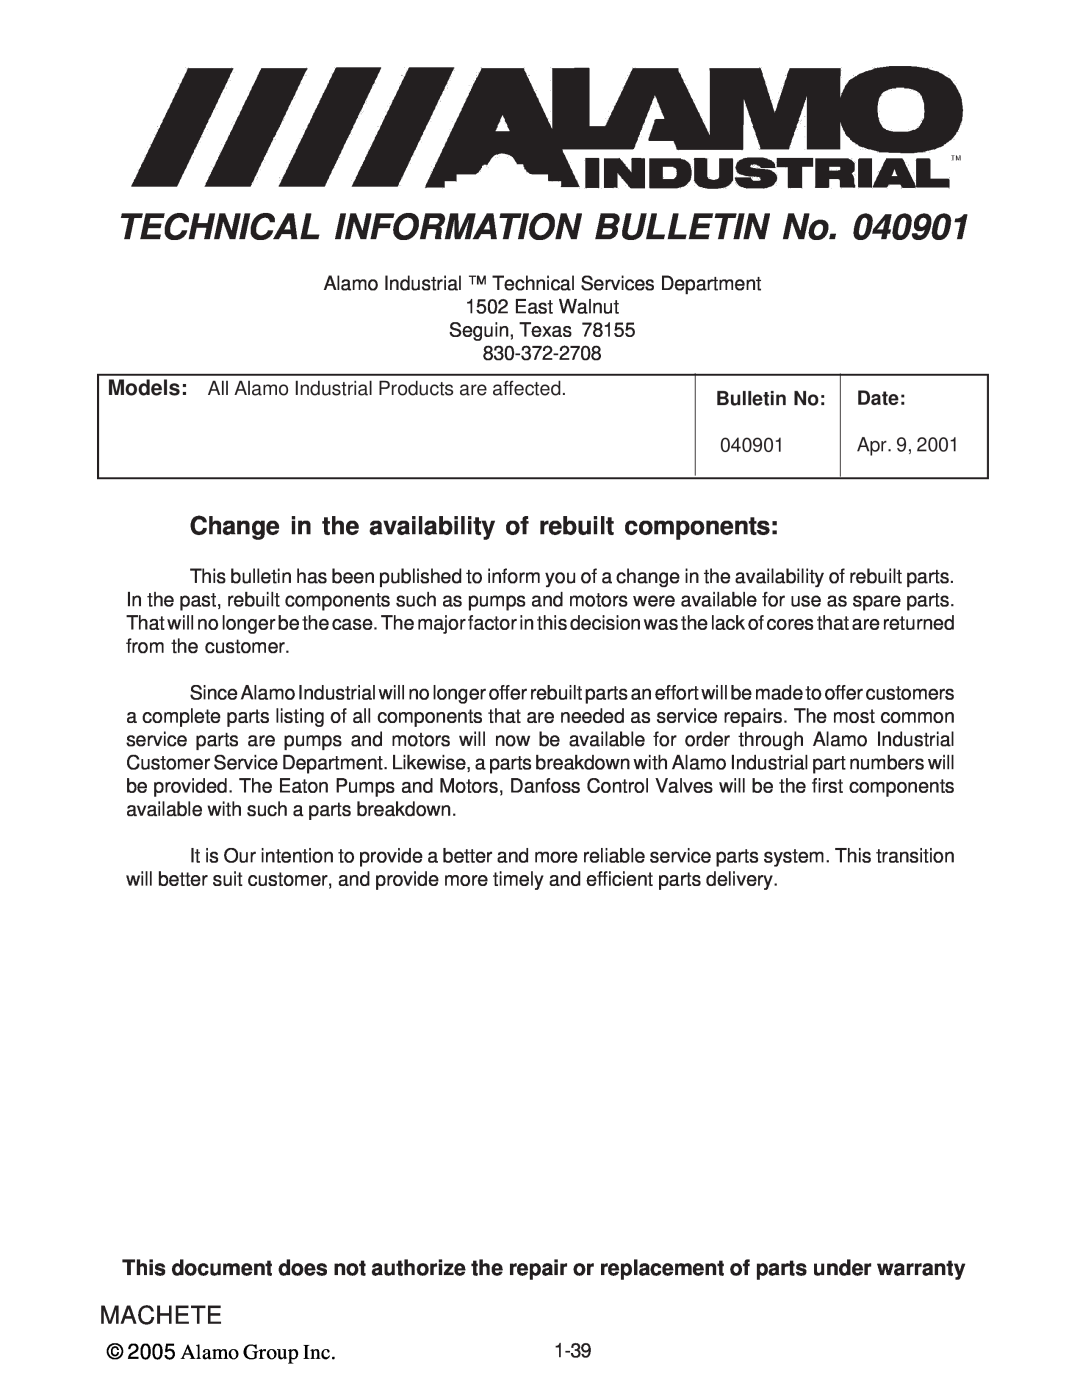 Alamo T 7740 Change in the availability of rebuilt components, TECHNICAL INFORMATION BULLETIN No, Machete, Alamo Group Inc 